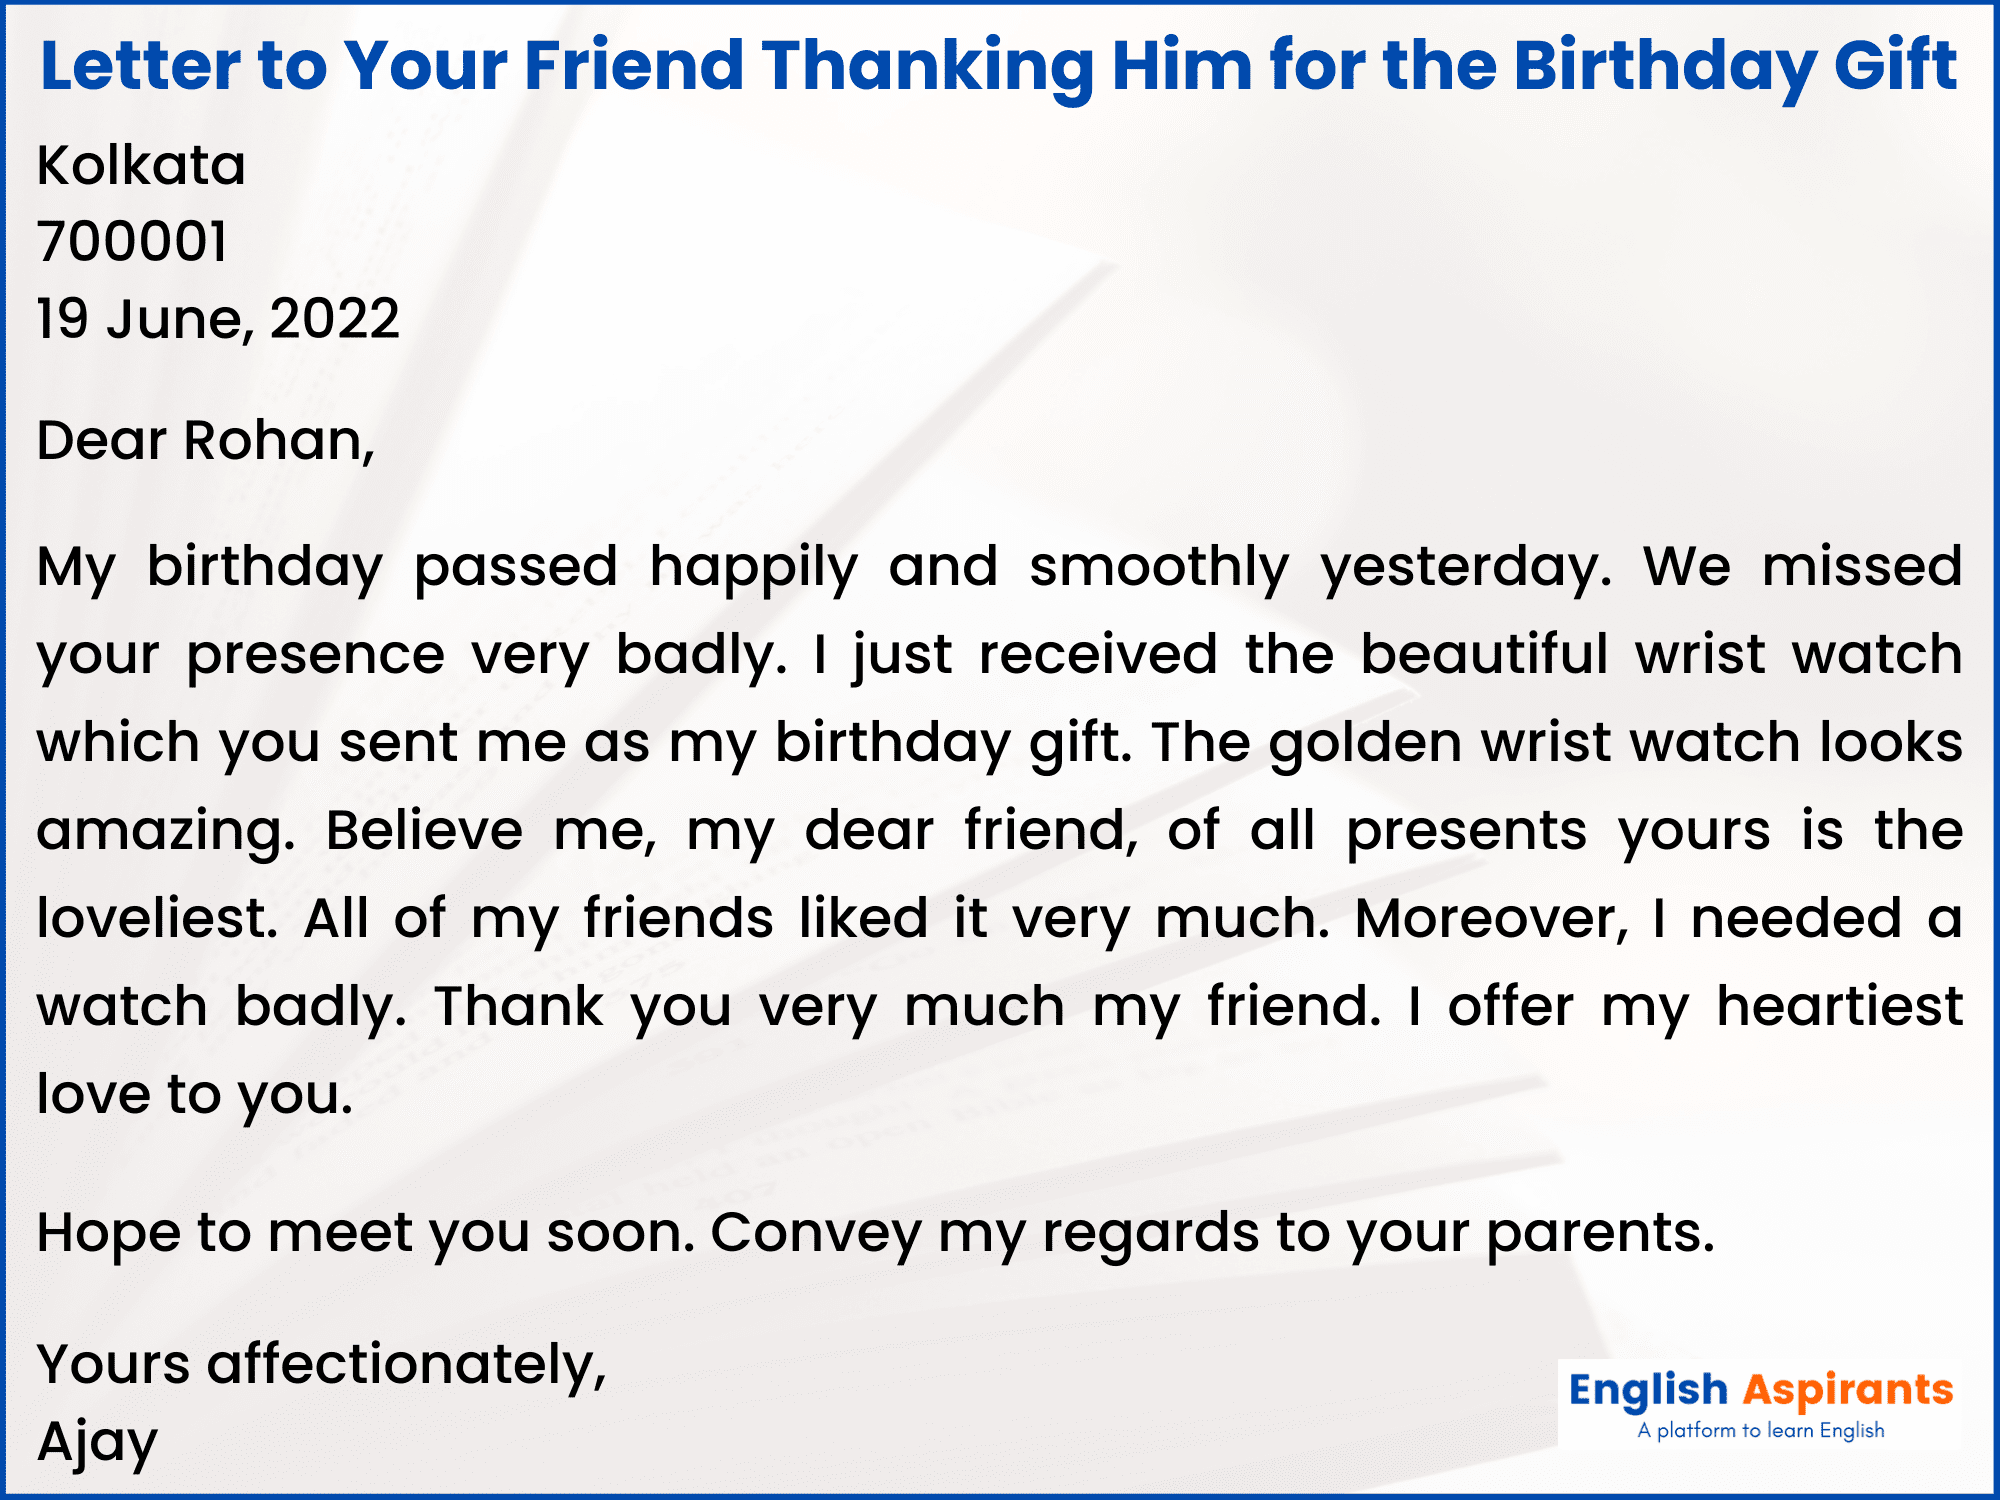 Write a Letter to Your Friend Thanking Him for the Birthday Gift He Sent You